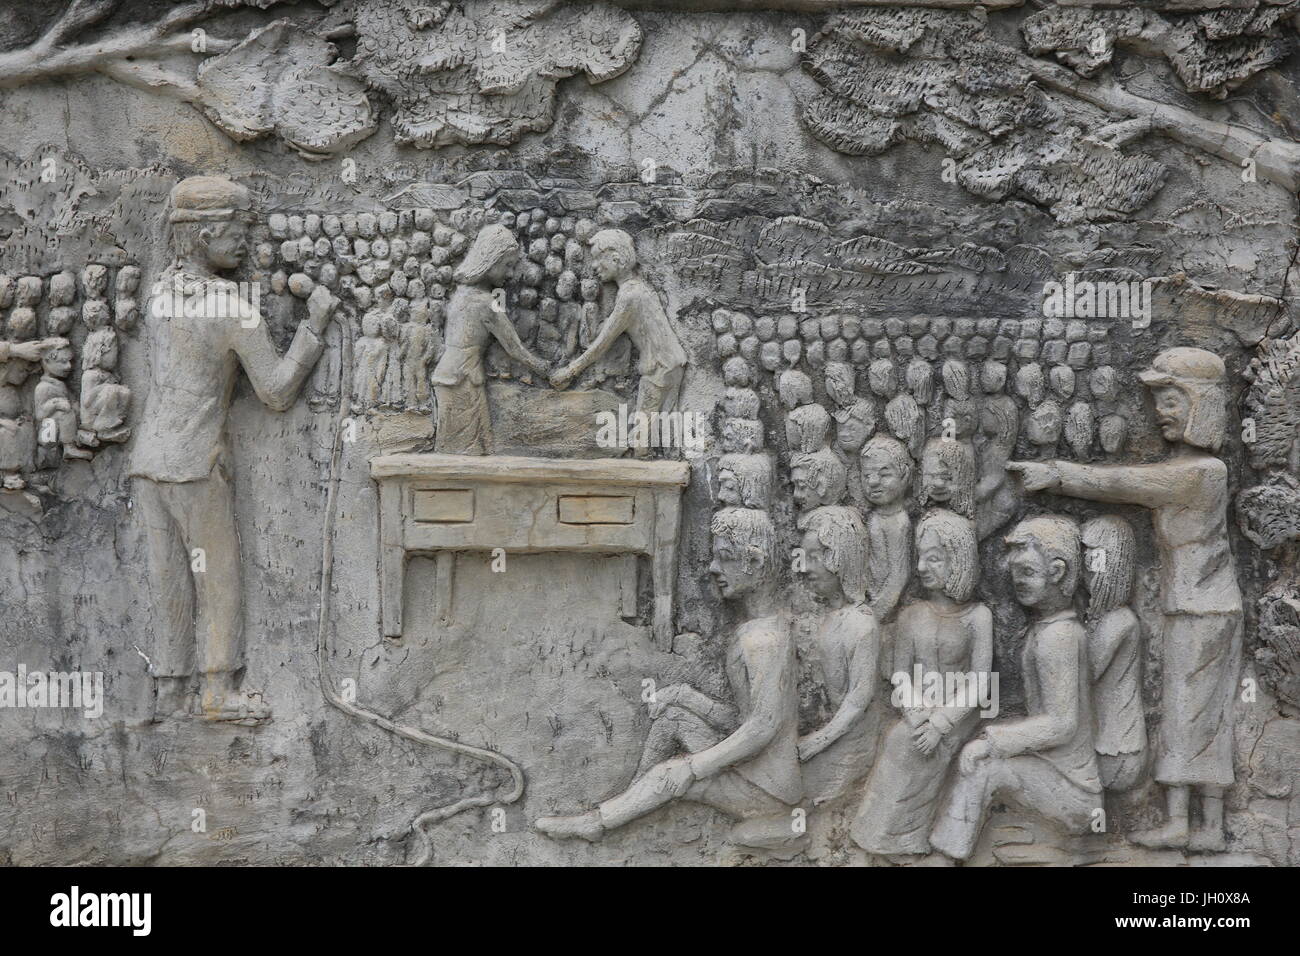 Memorial shrine festooned with bas-reliefs of Khmer Rouge atrocities at Wat Somrong Knong. Cambodia. Stock Photo